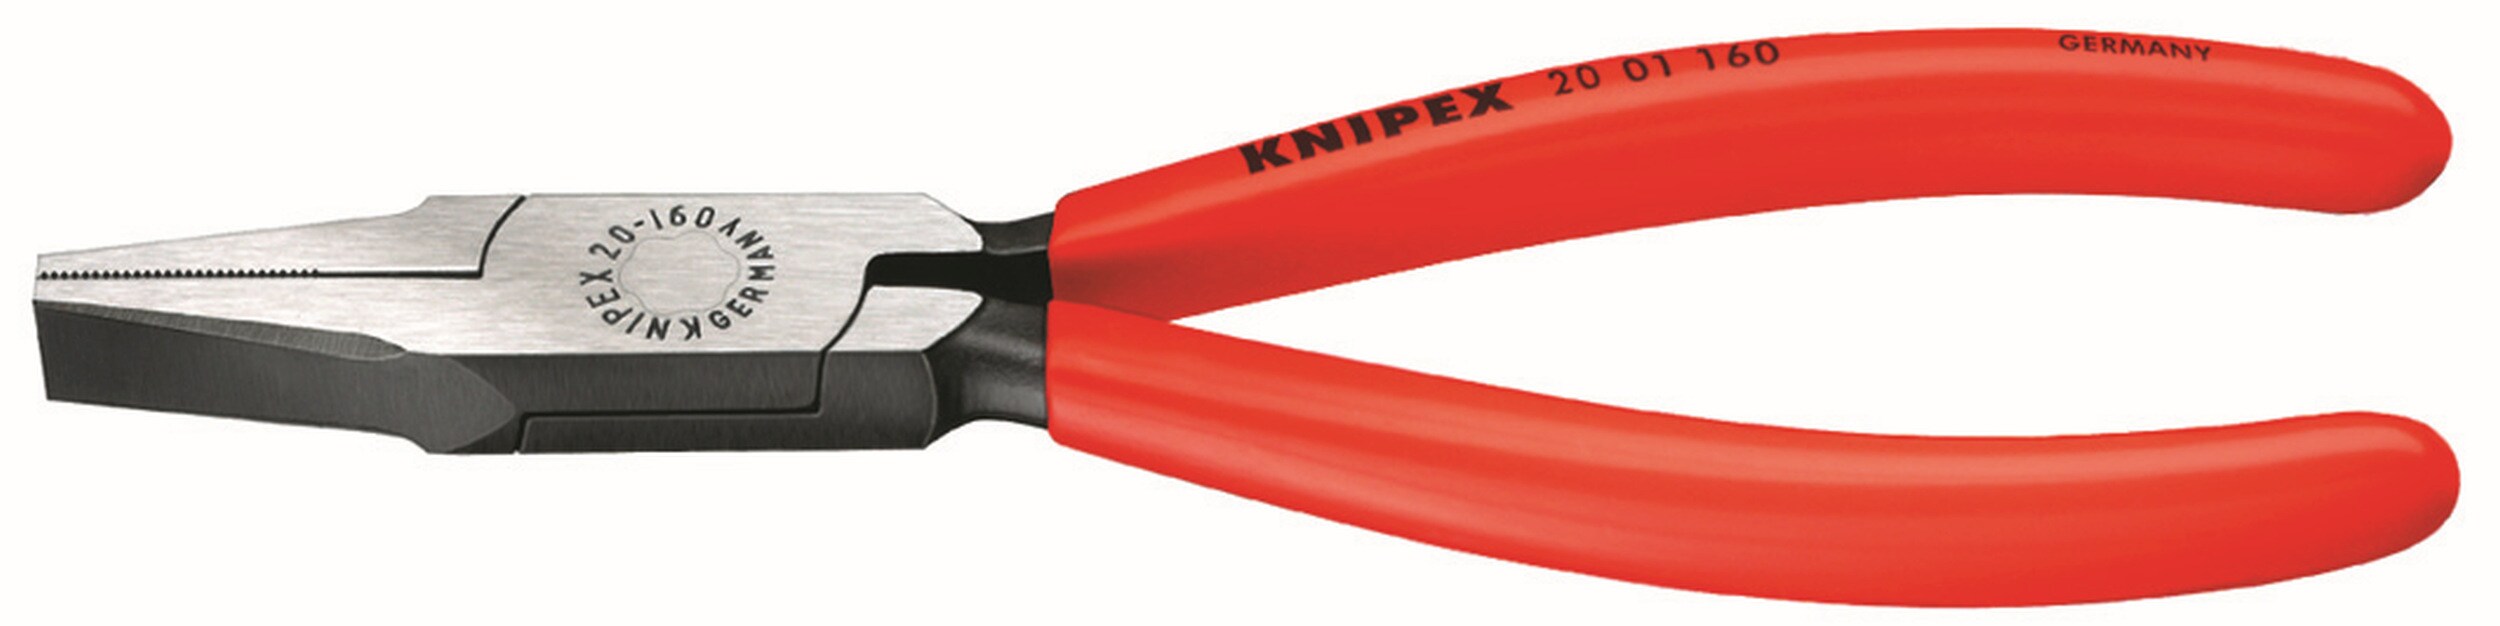 Knipex 2911160 Flat Nose Assembly Pliers 6.25 Inch 